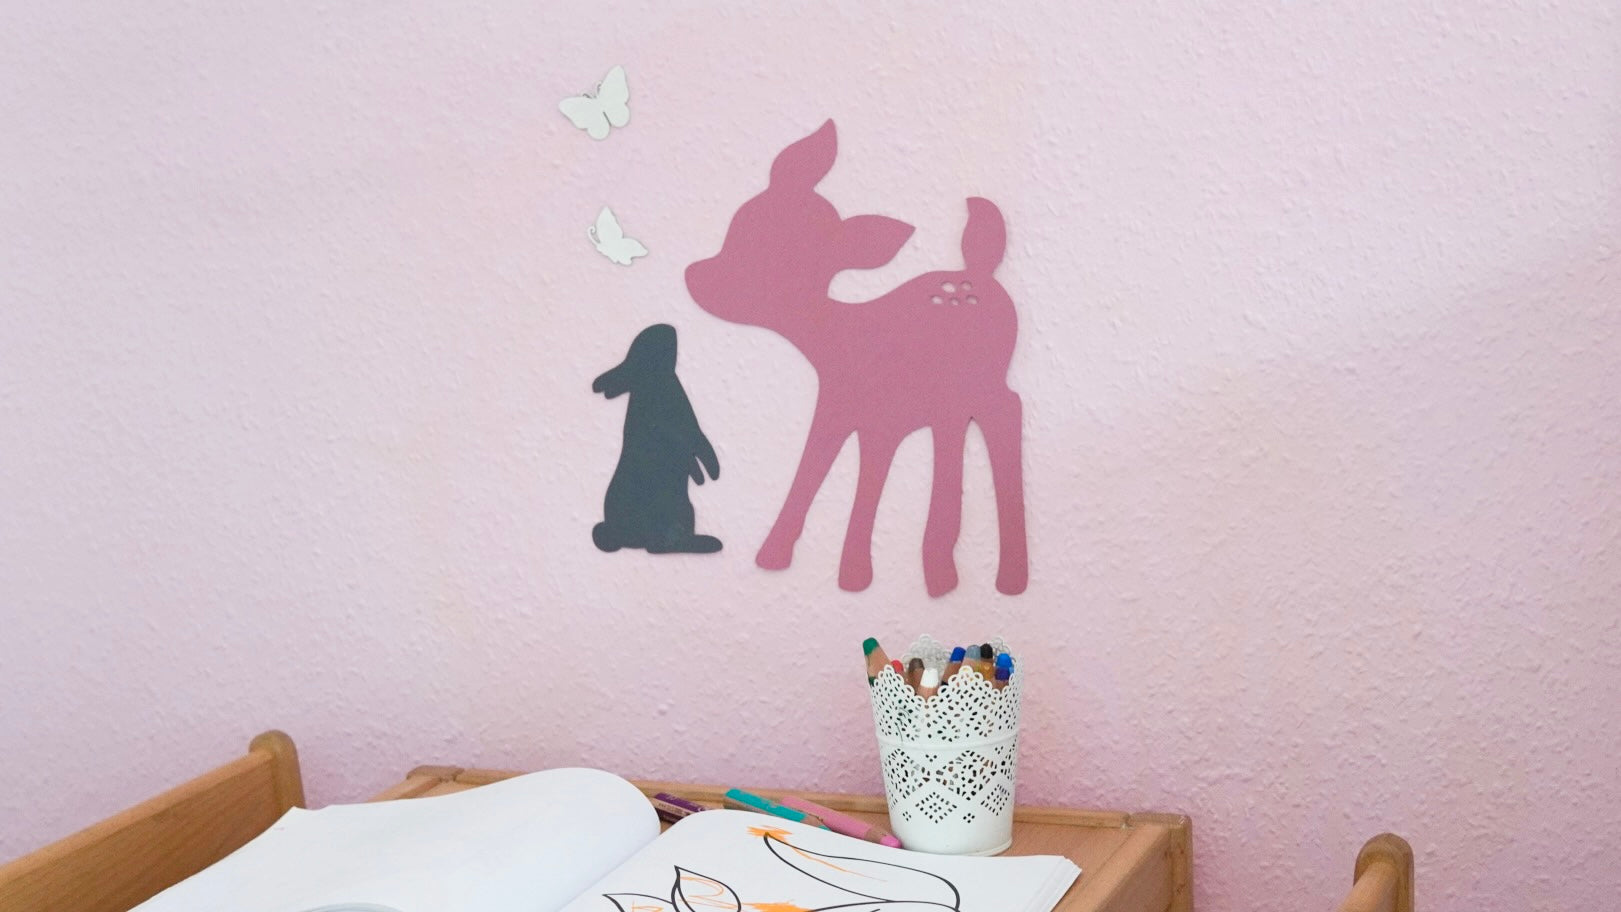 Tinker wall stickers